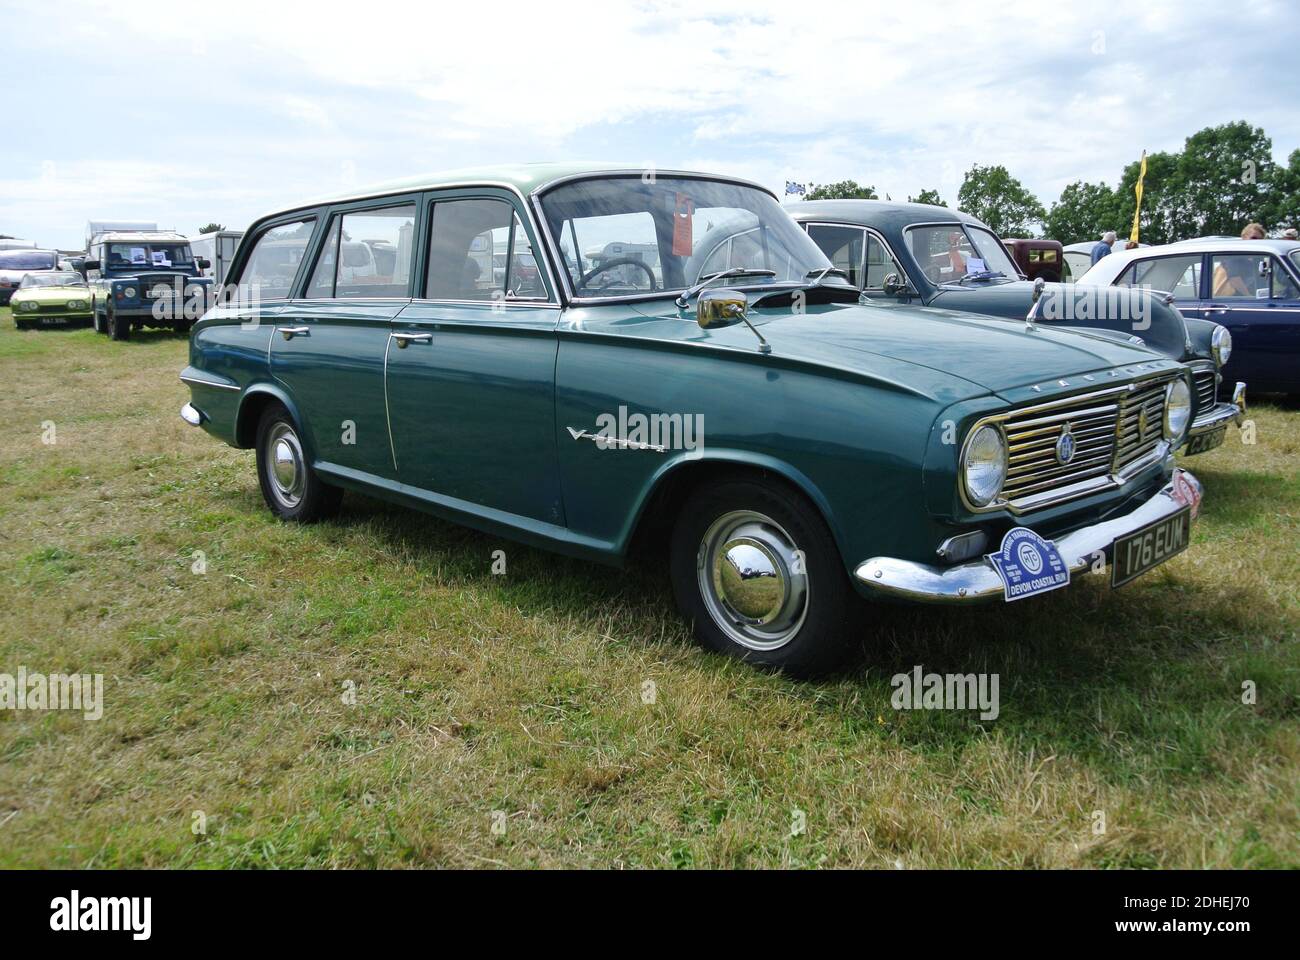 A Vauxhall Victor Super Estate parked up on display at the Torbay Steam Fair, Churston, Devon, England, UK. Stock Photo